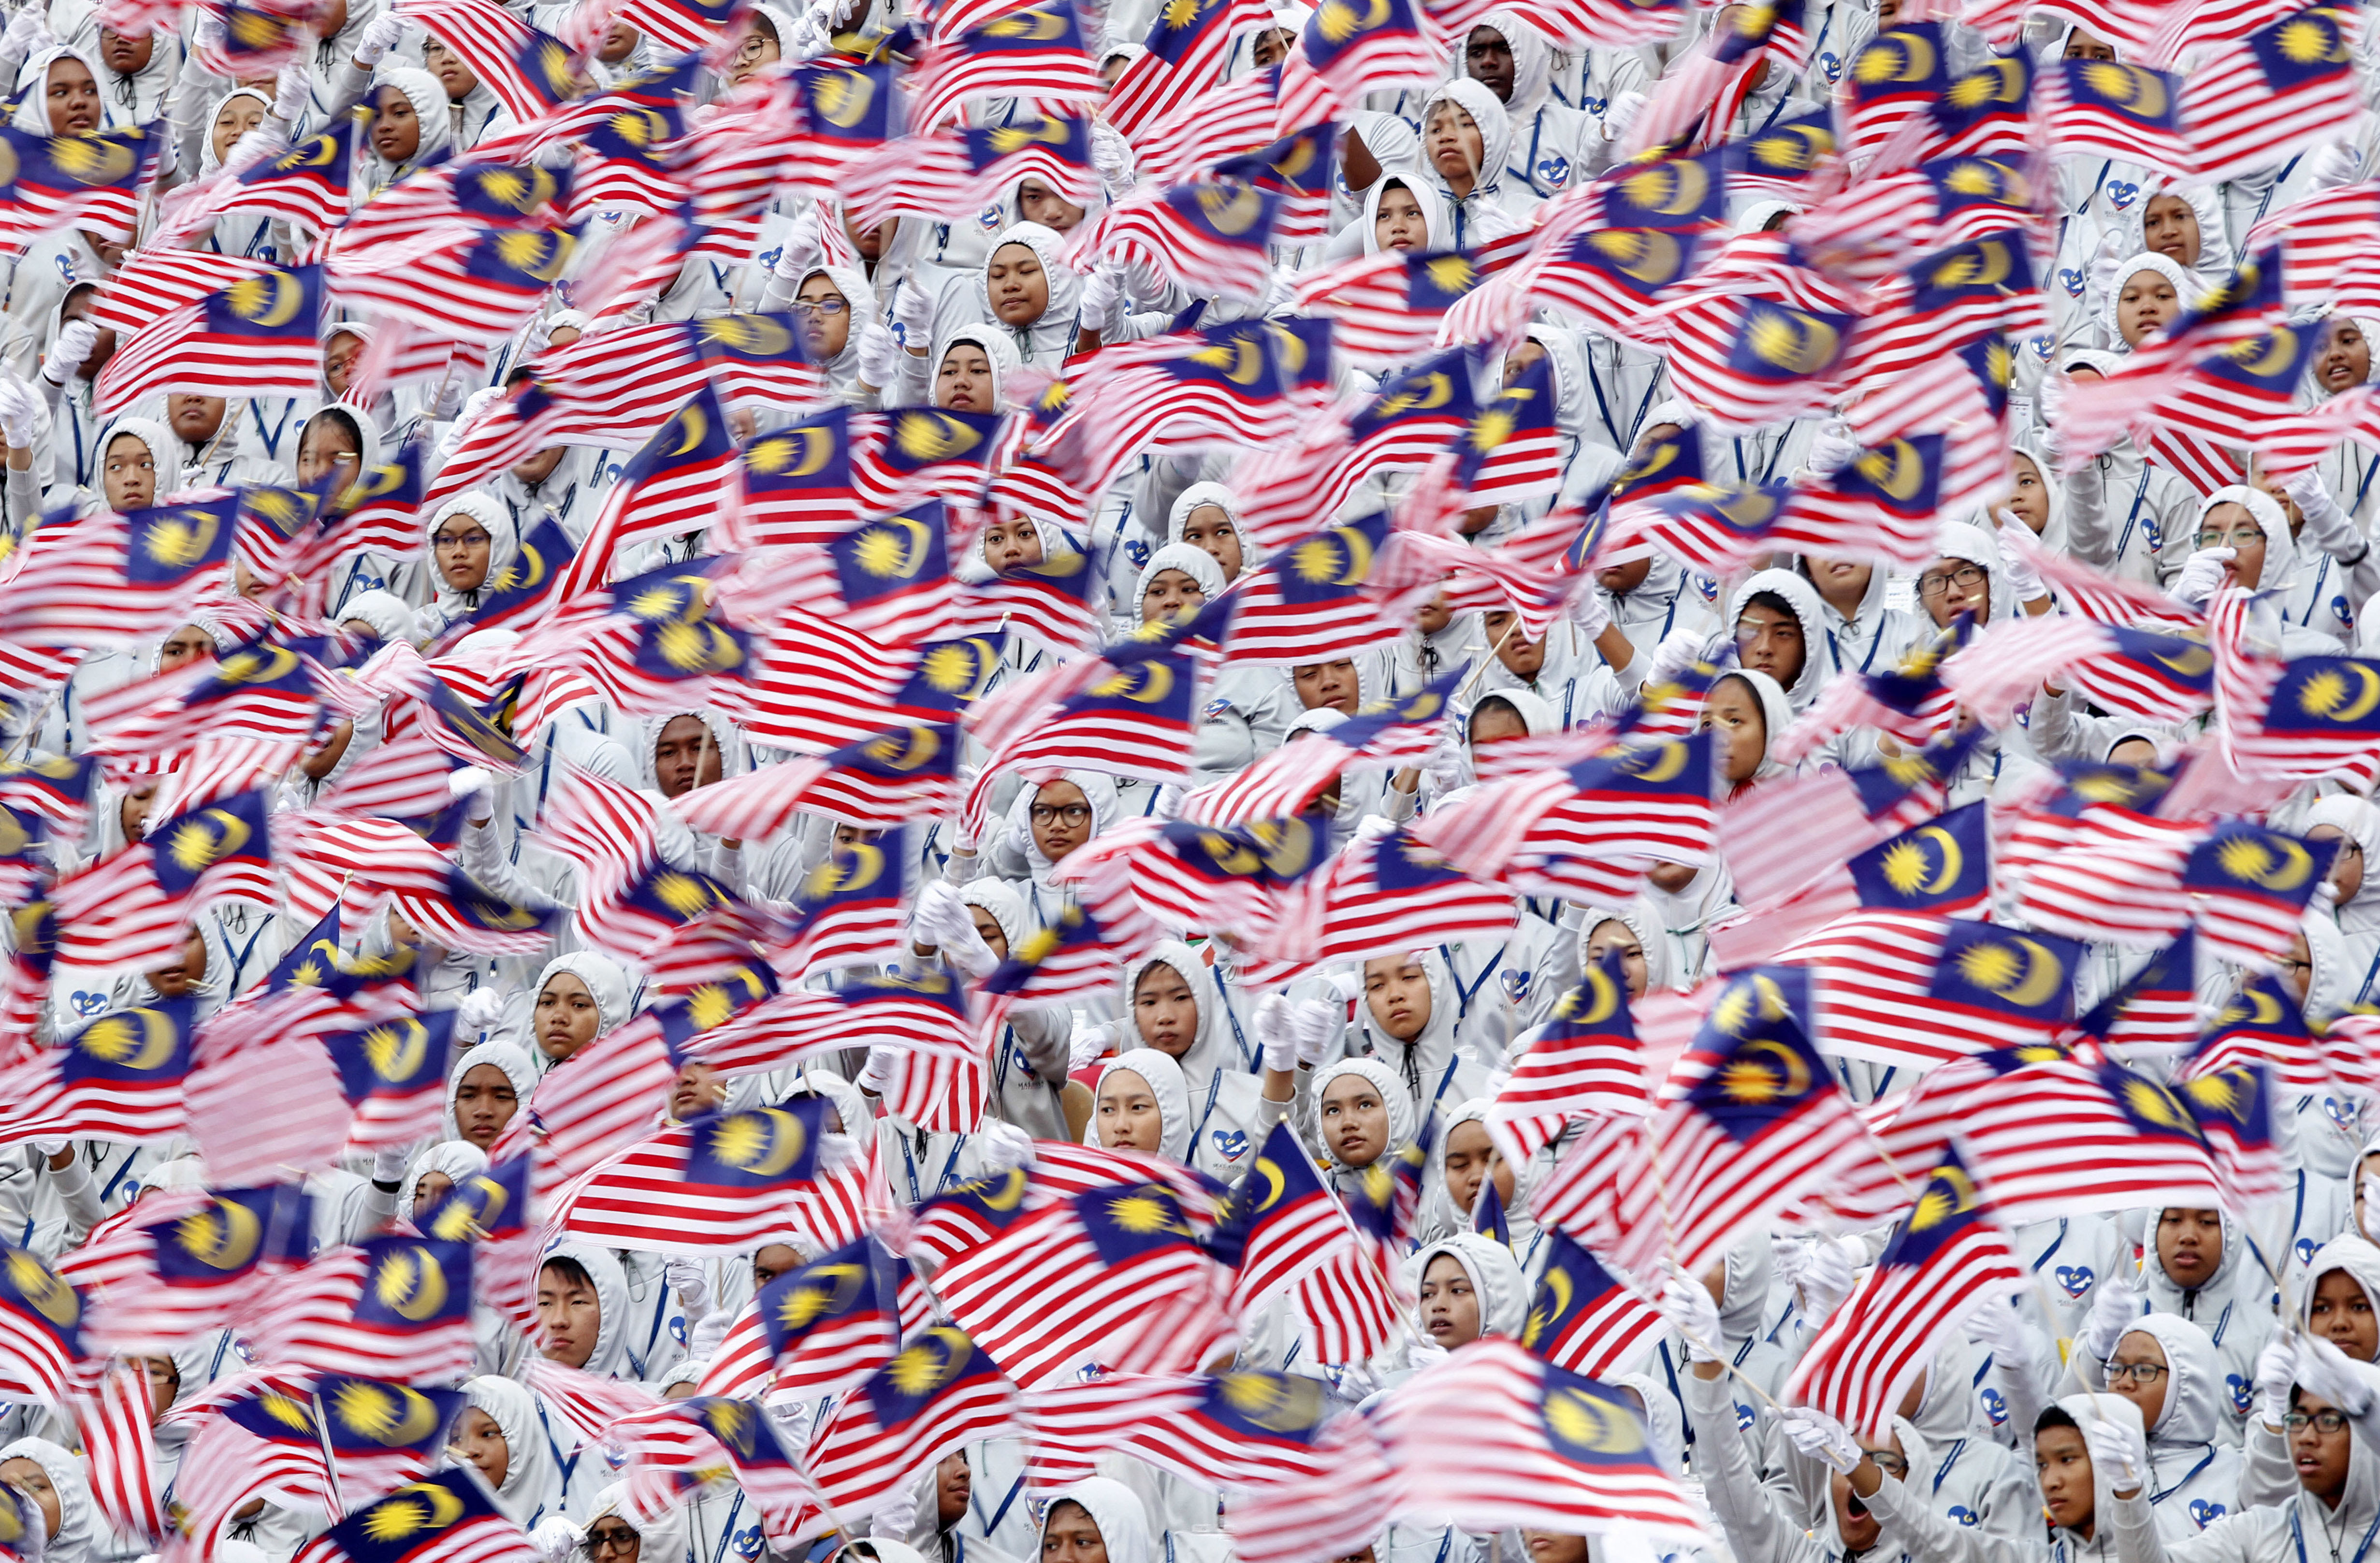 Students wave the Malaysian flag during the 59th National Day celebrations at the Independence Square in Kuala Lumpur, Malaysia, on Wednesday,